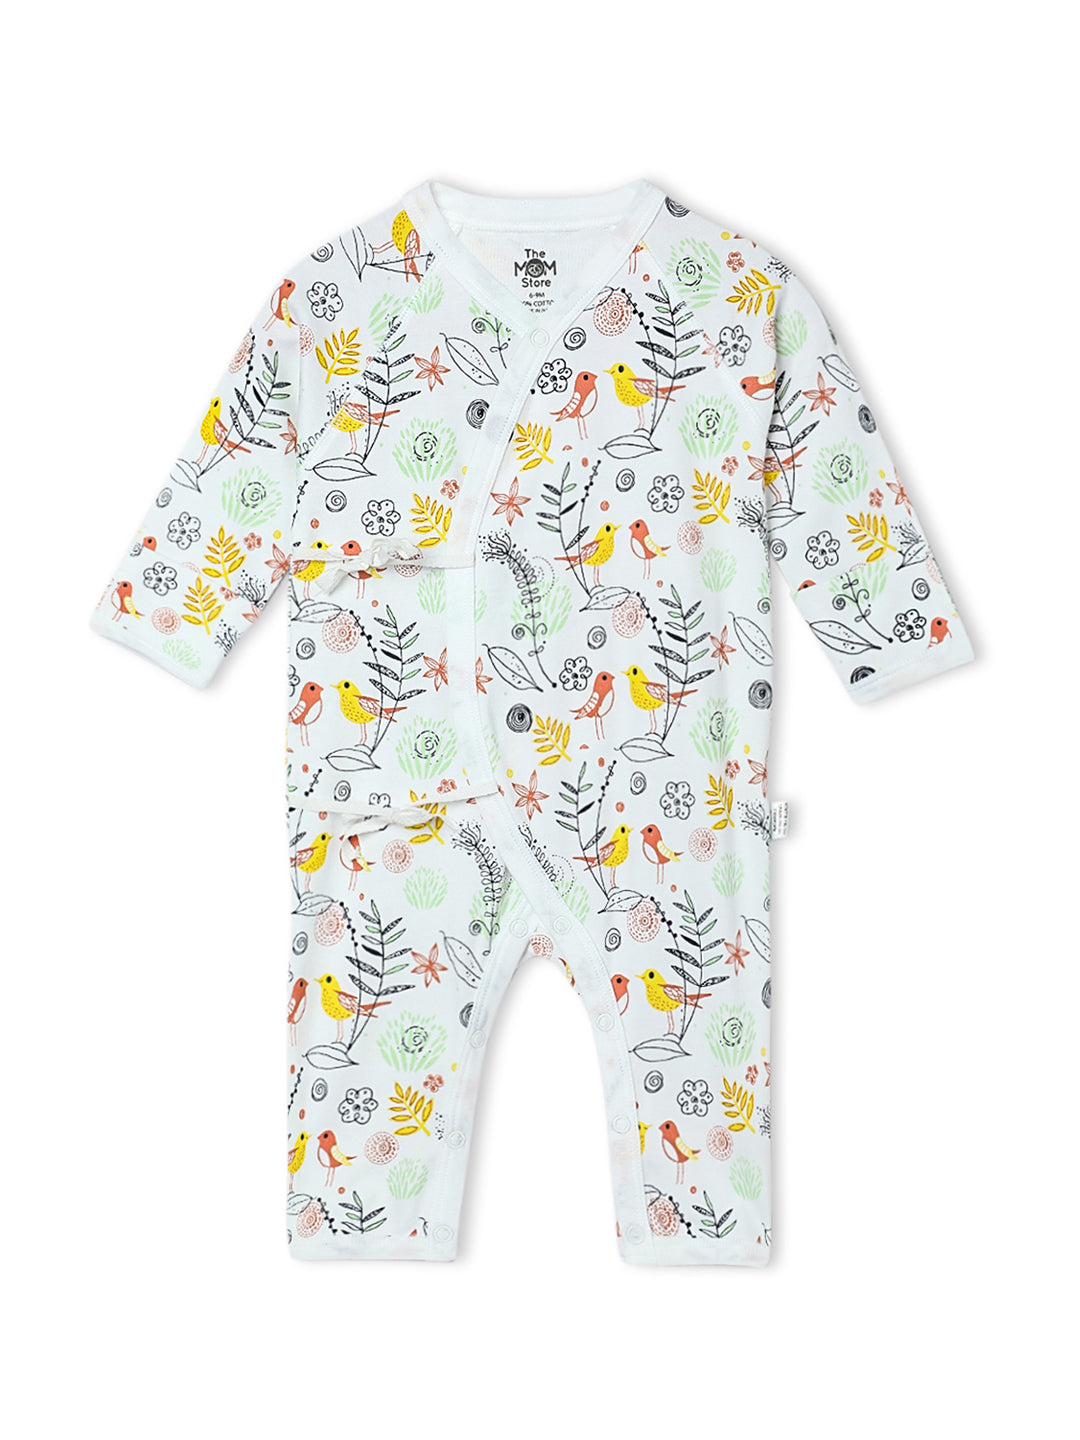 Sparrow in the Garden Infant Romper (Jabla Style)